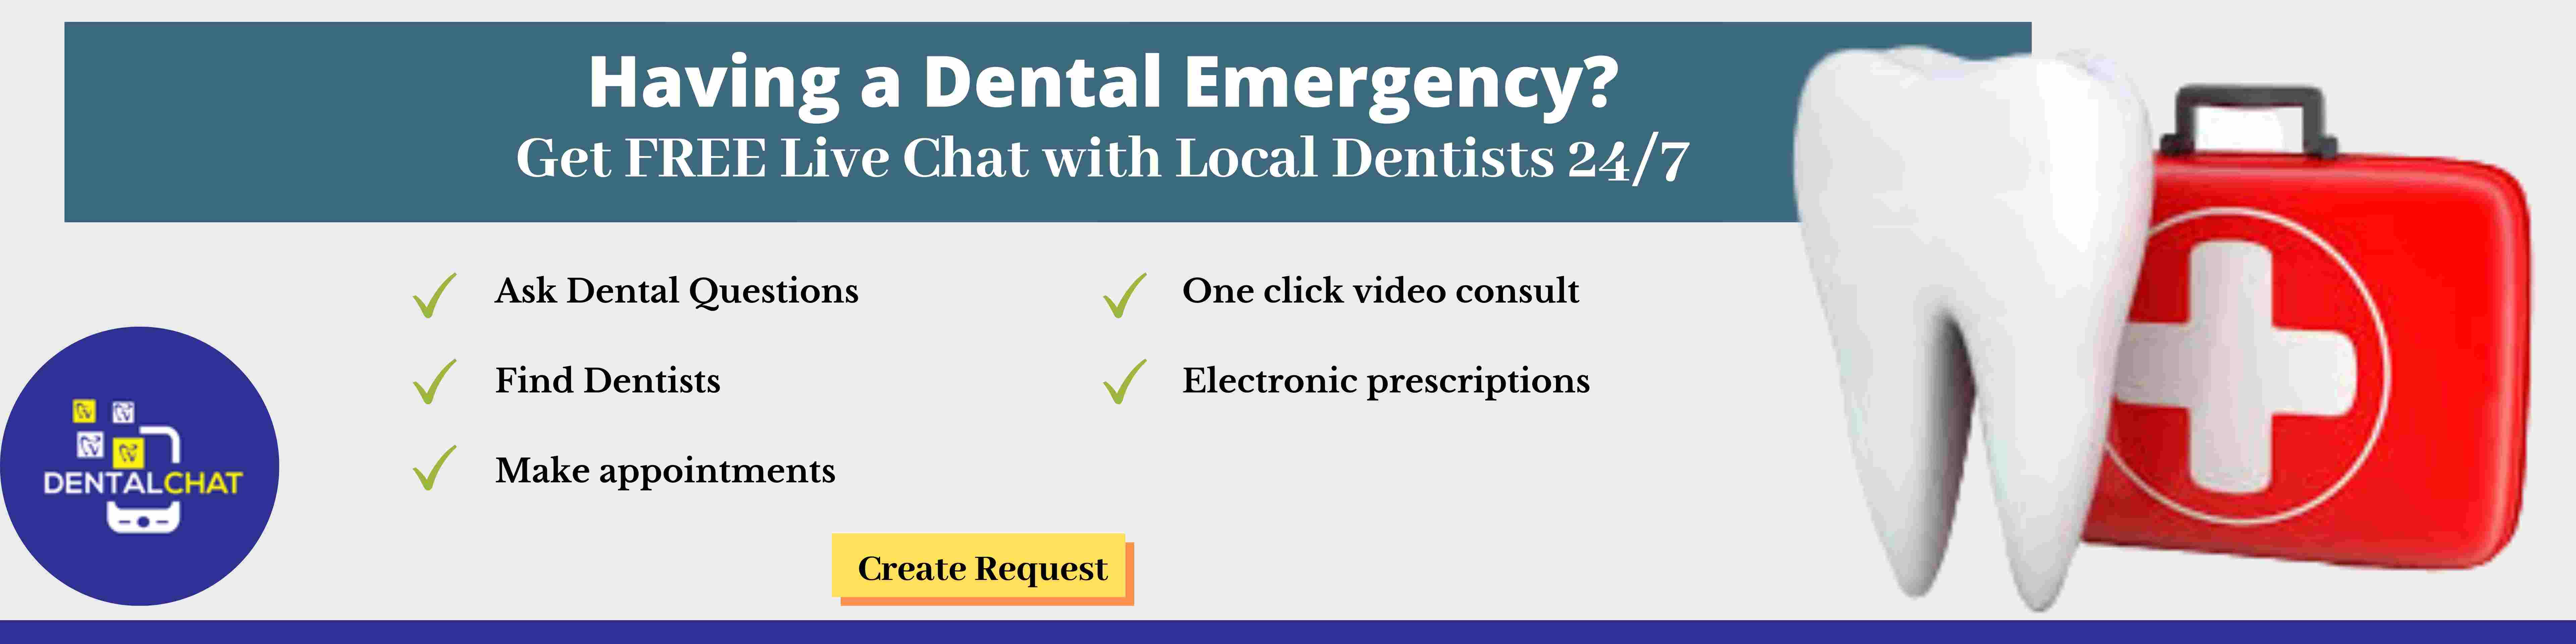 Find best ocal emergency dentist information, free local dentists consult online, tooth problems info blog